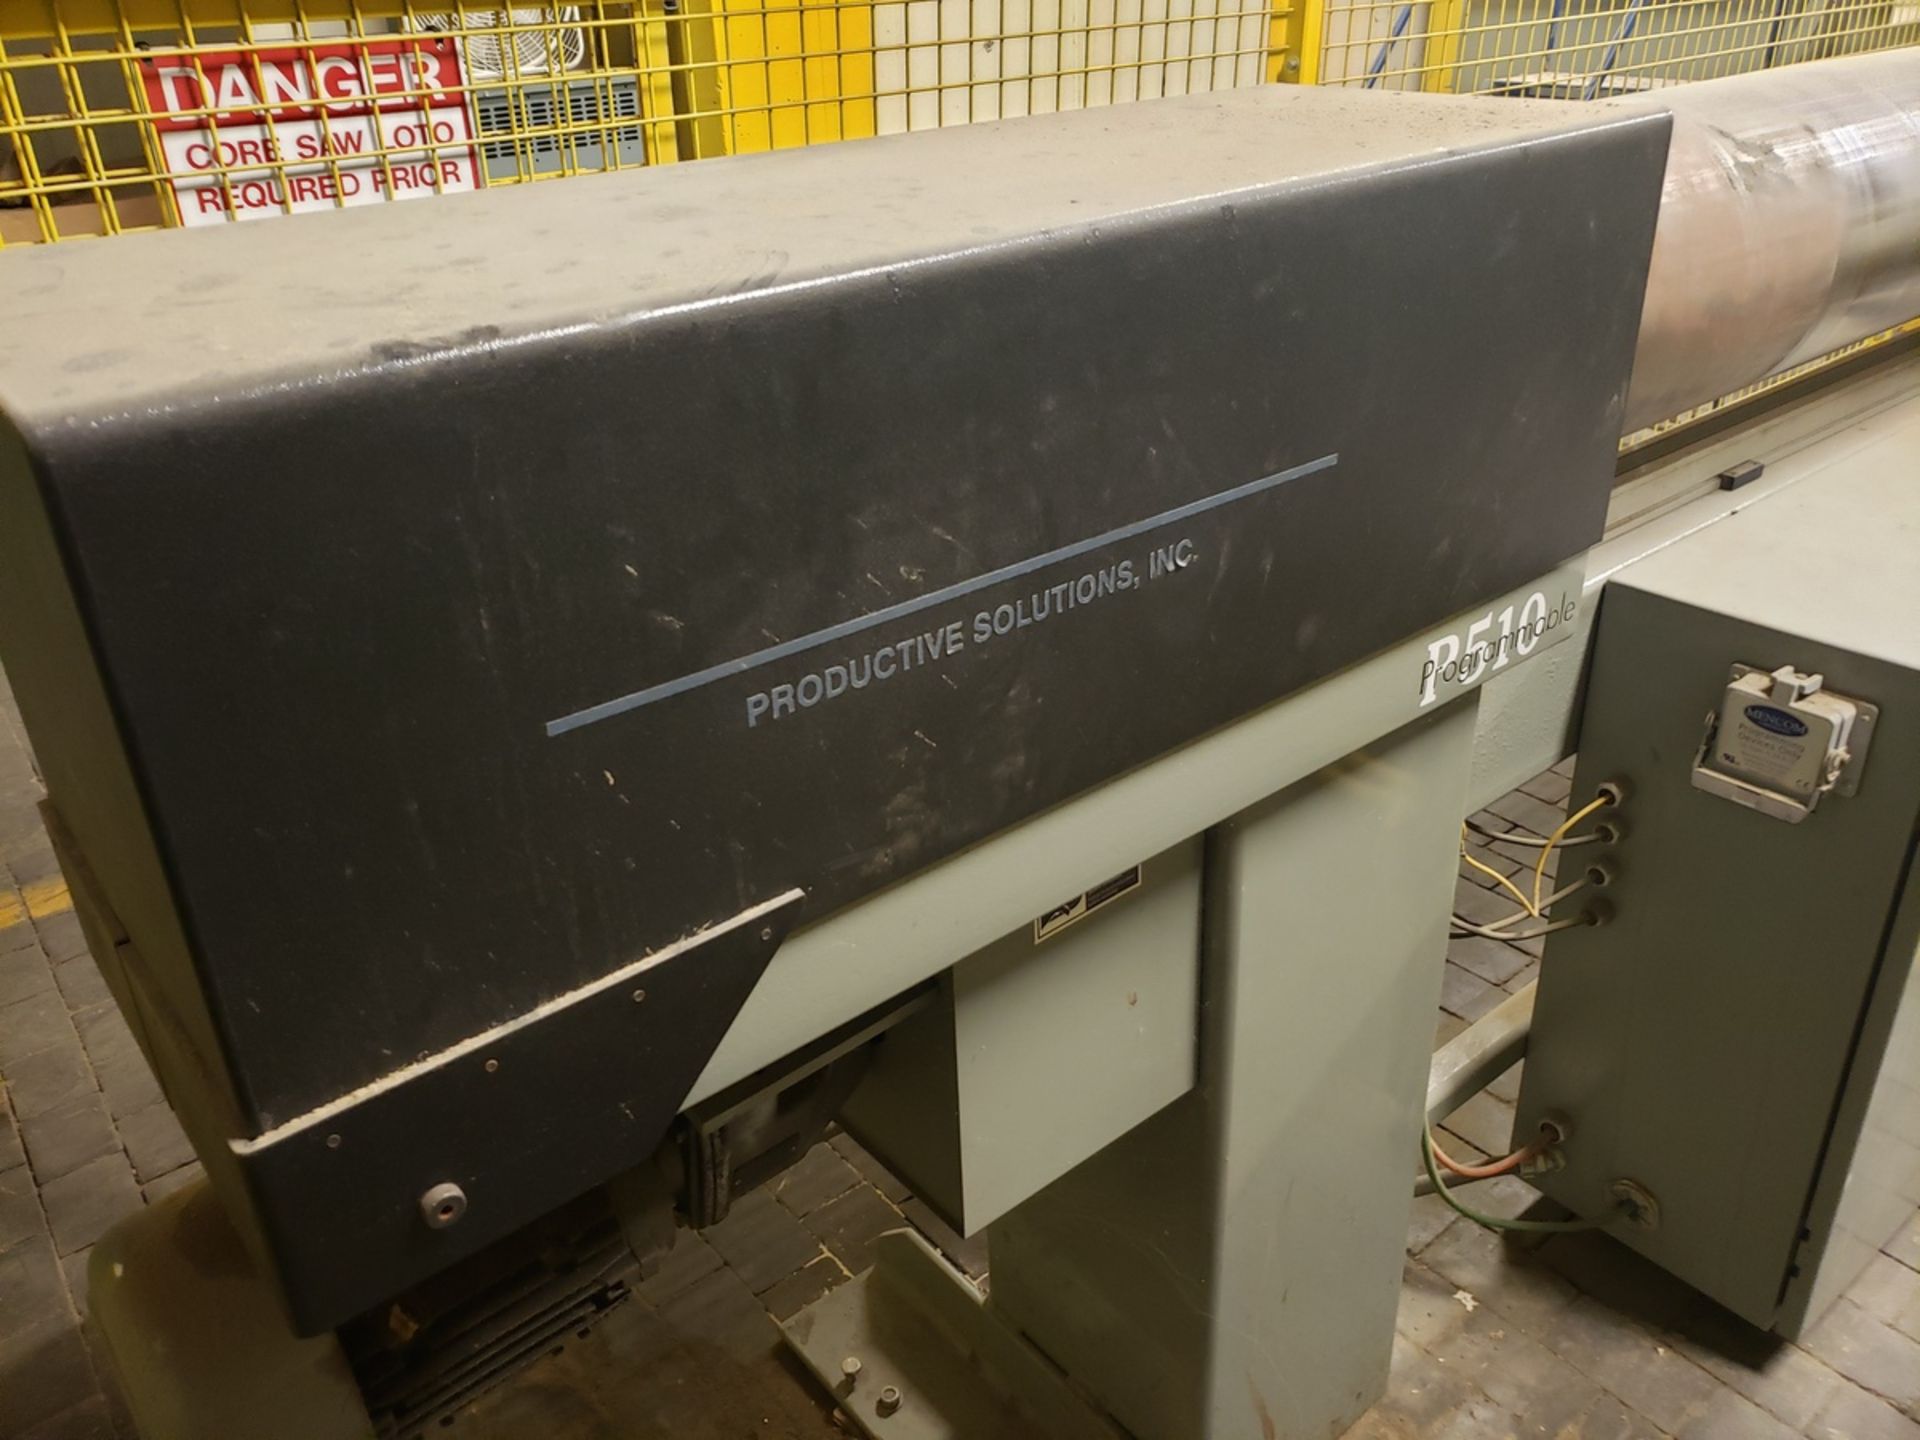 Appleton Productive Solutions Core Cutting Machine, M# P510, S/N 010214 | Rig Fee $4750 - Image 2 of 7